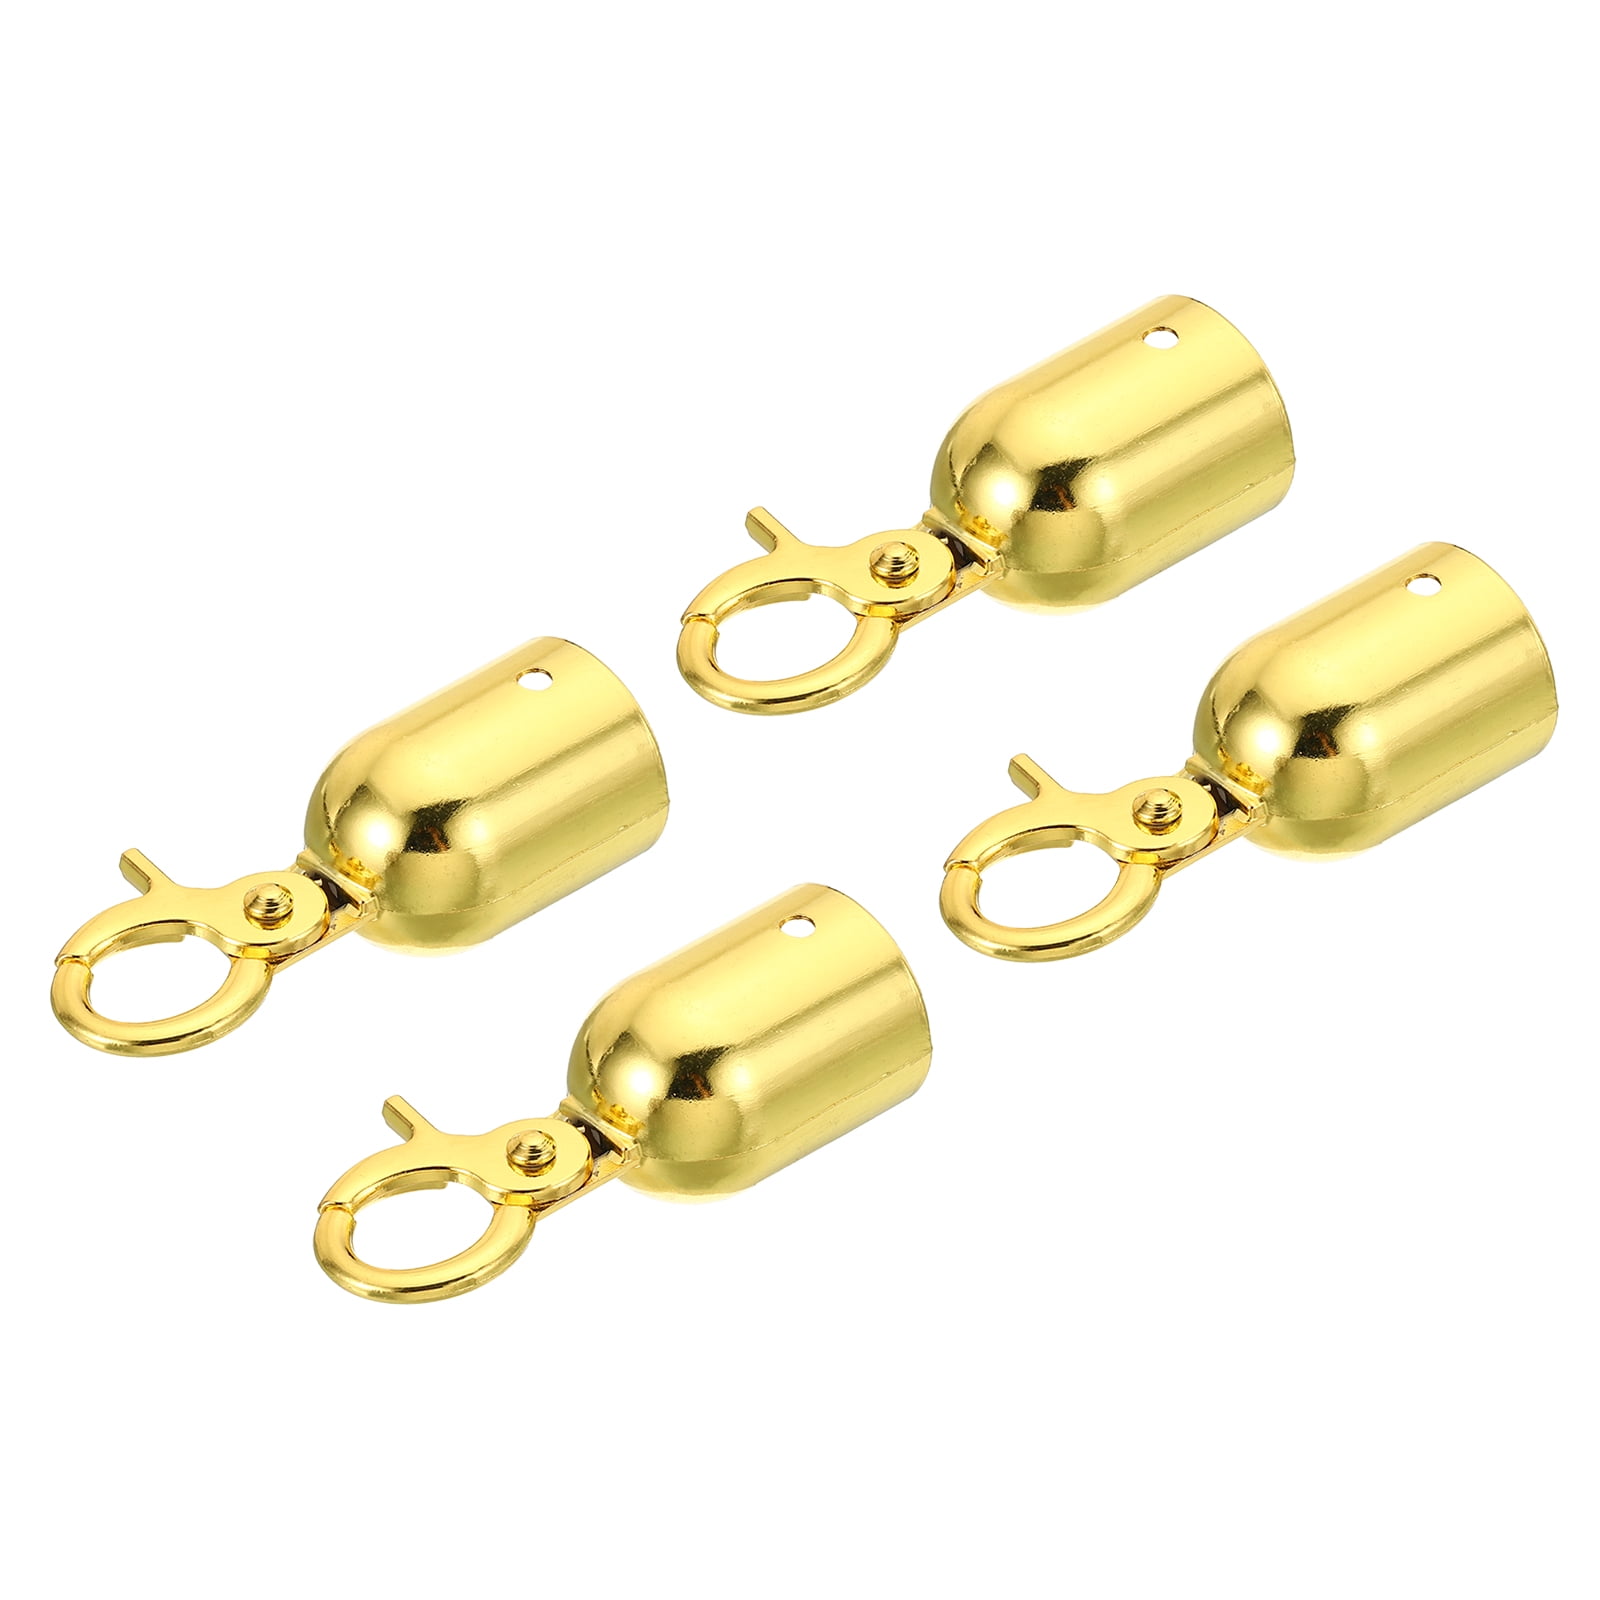 Uxcell 1.1 Stanchion Rope End Stopper Cord End Caps Barrier Rope End Cap  Snap Hooks for Crowd Control, Golden 4 Pack 